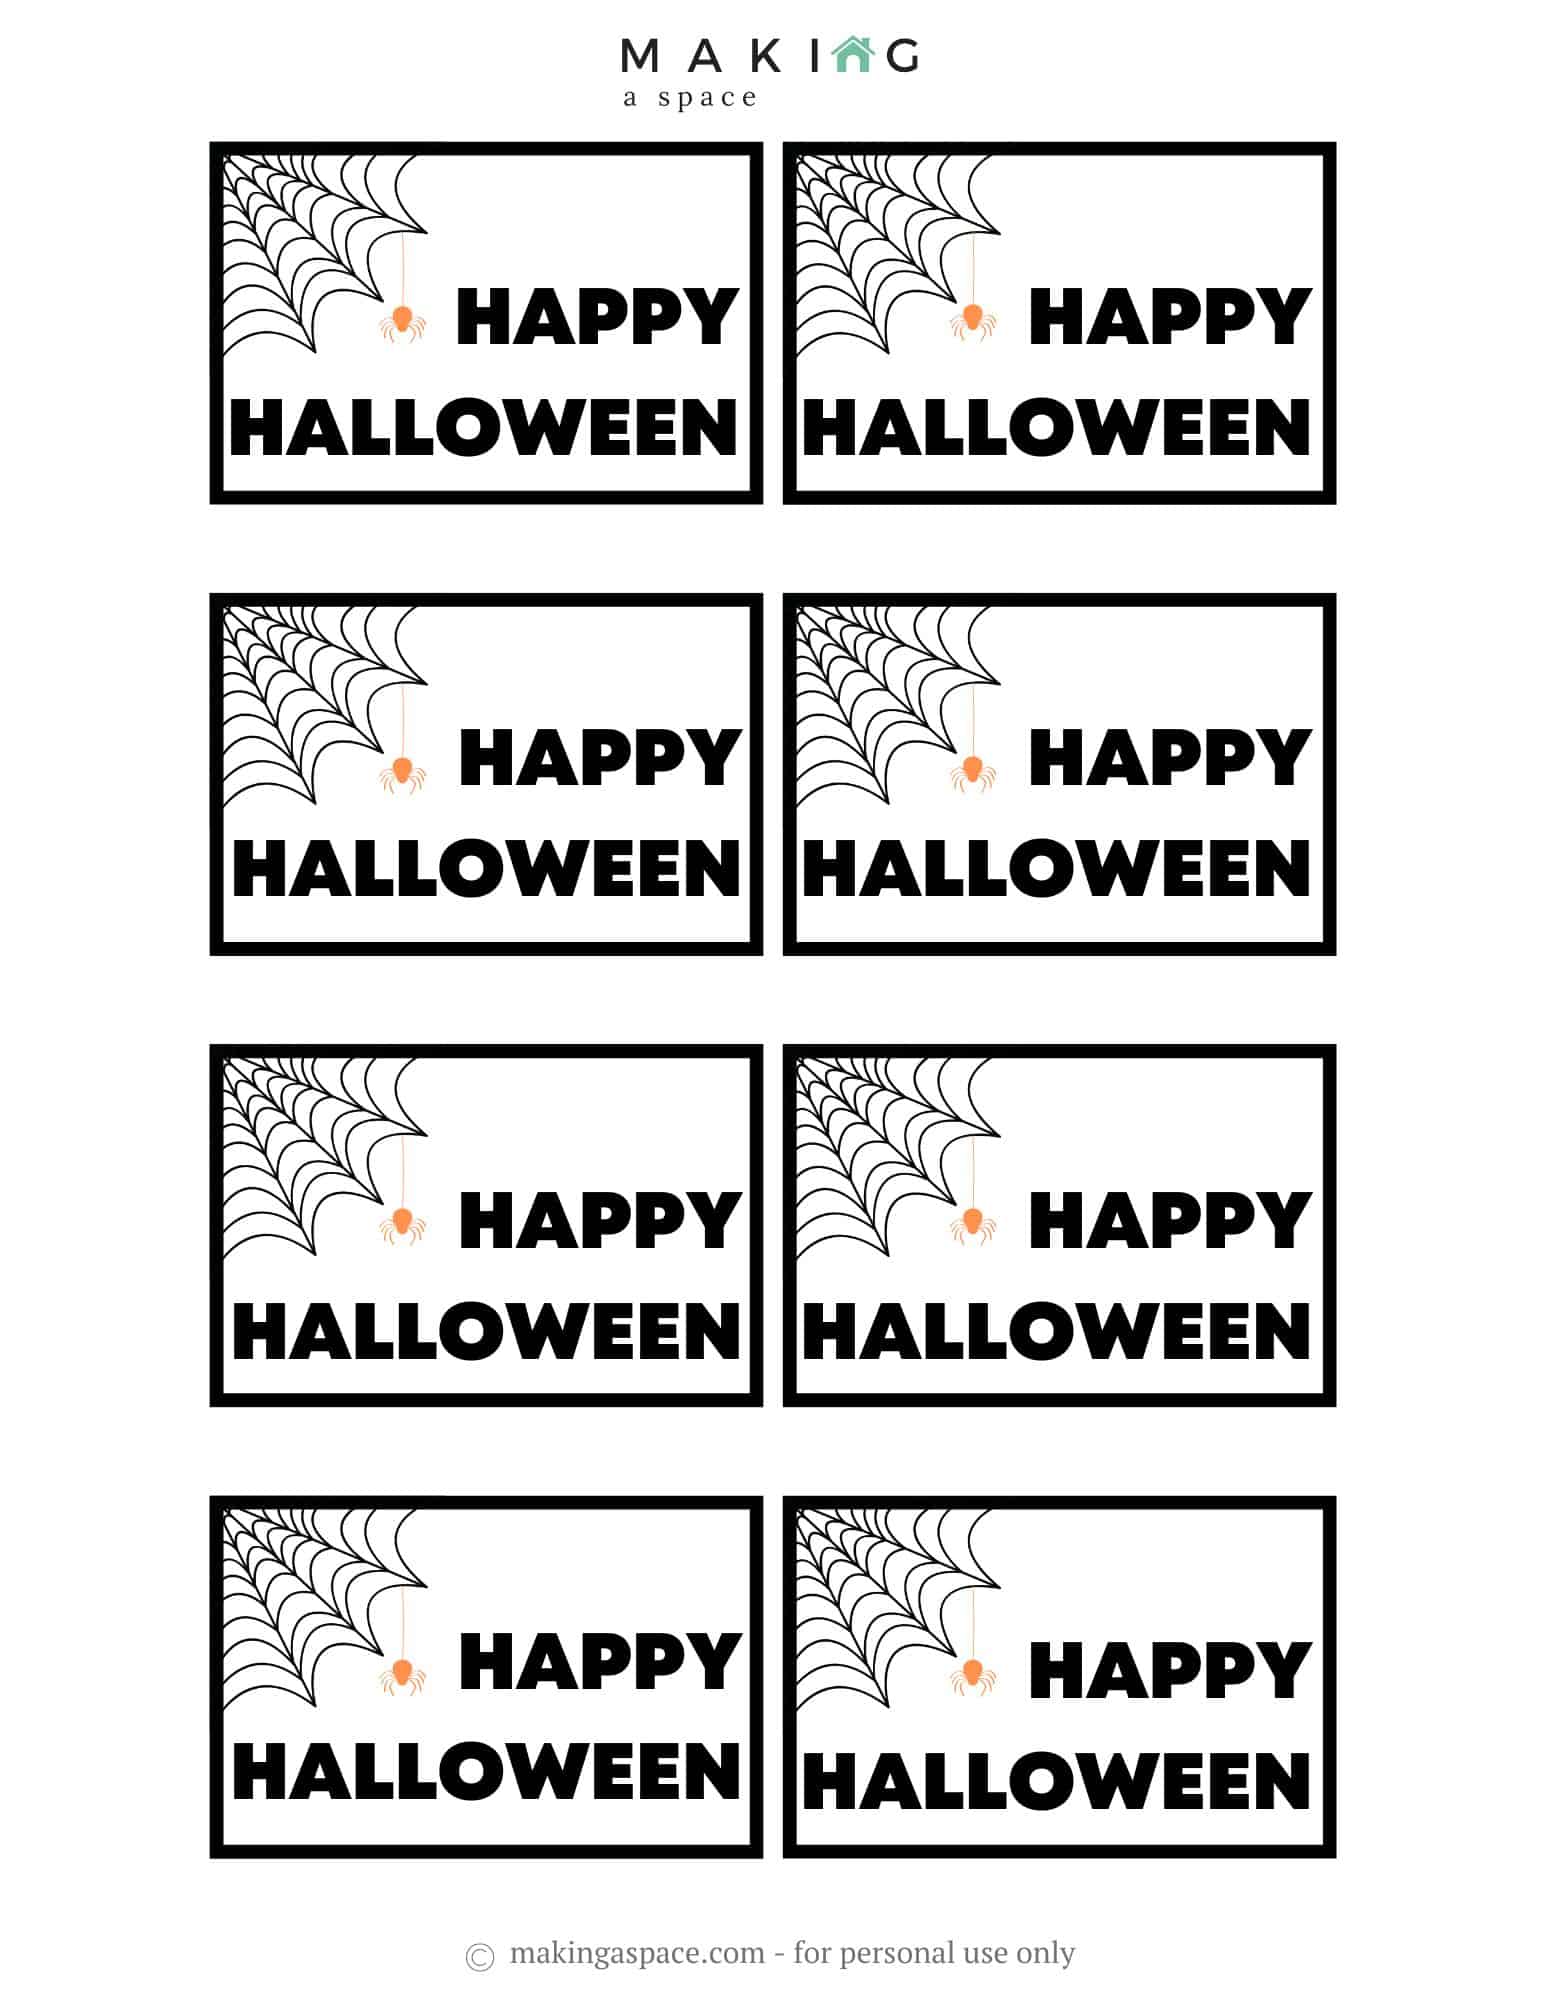 Details more than 85 halloween tags for goodie bags super hot in